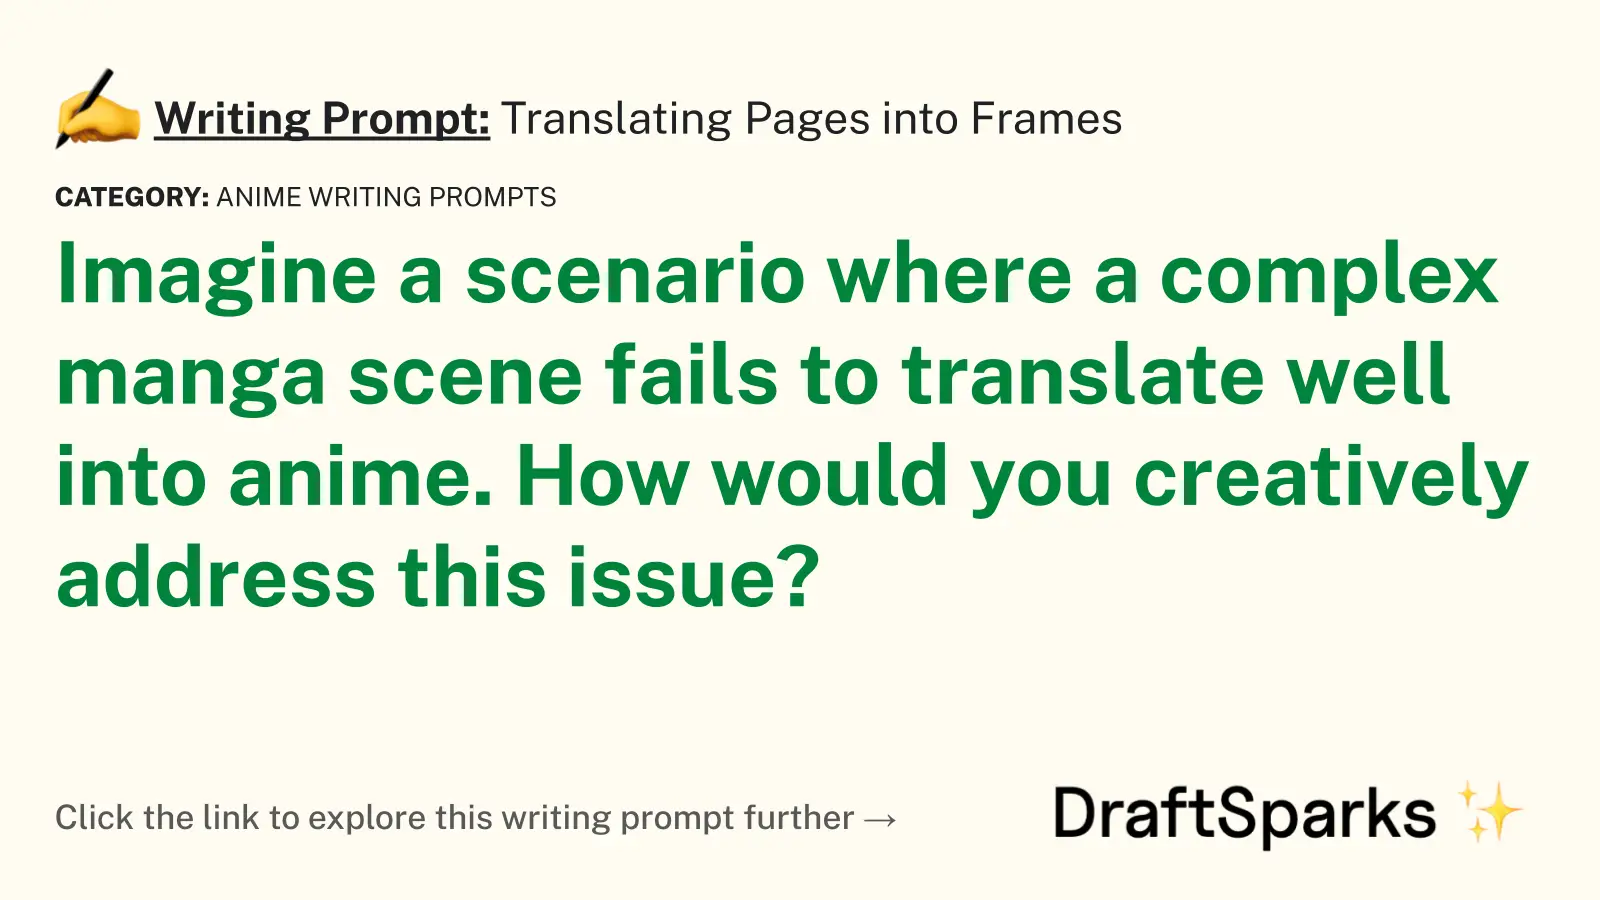 Translating Pages into Frames